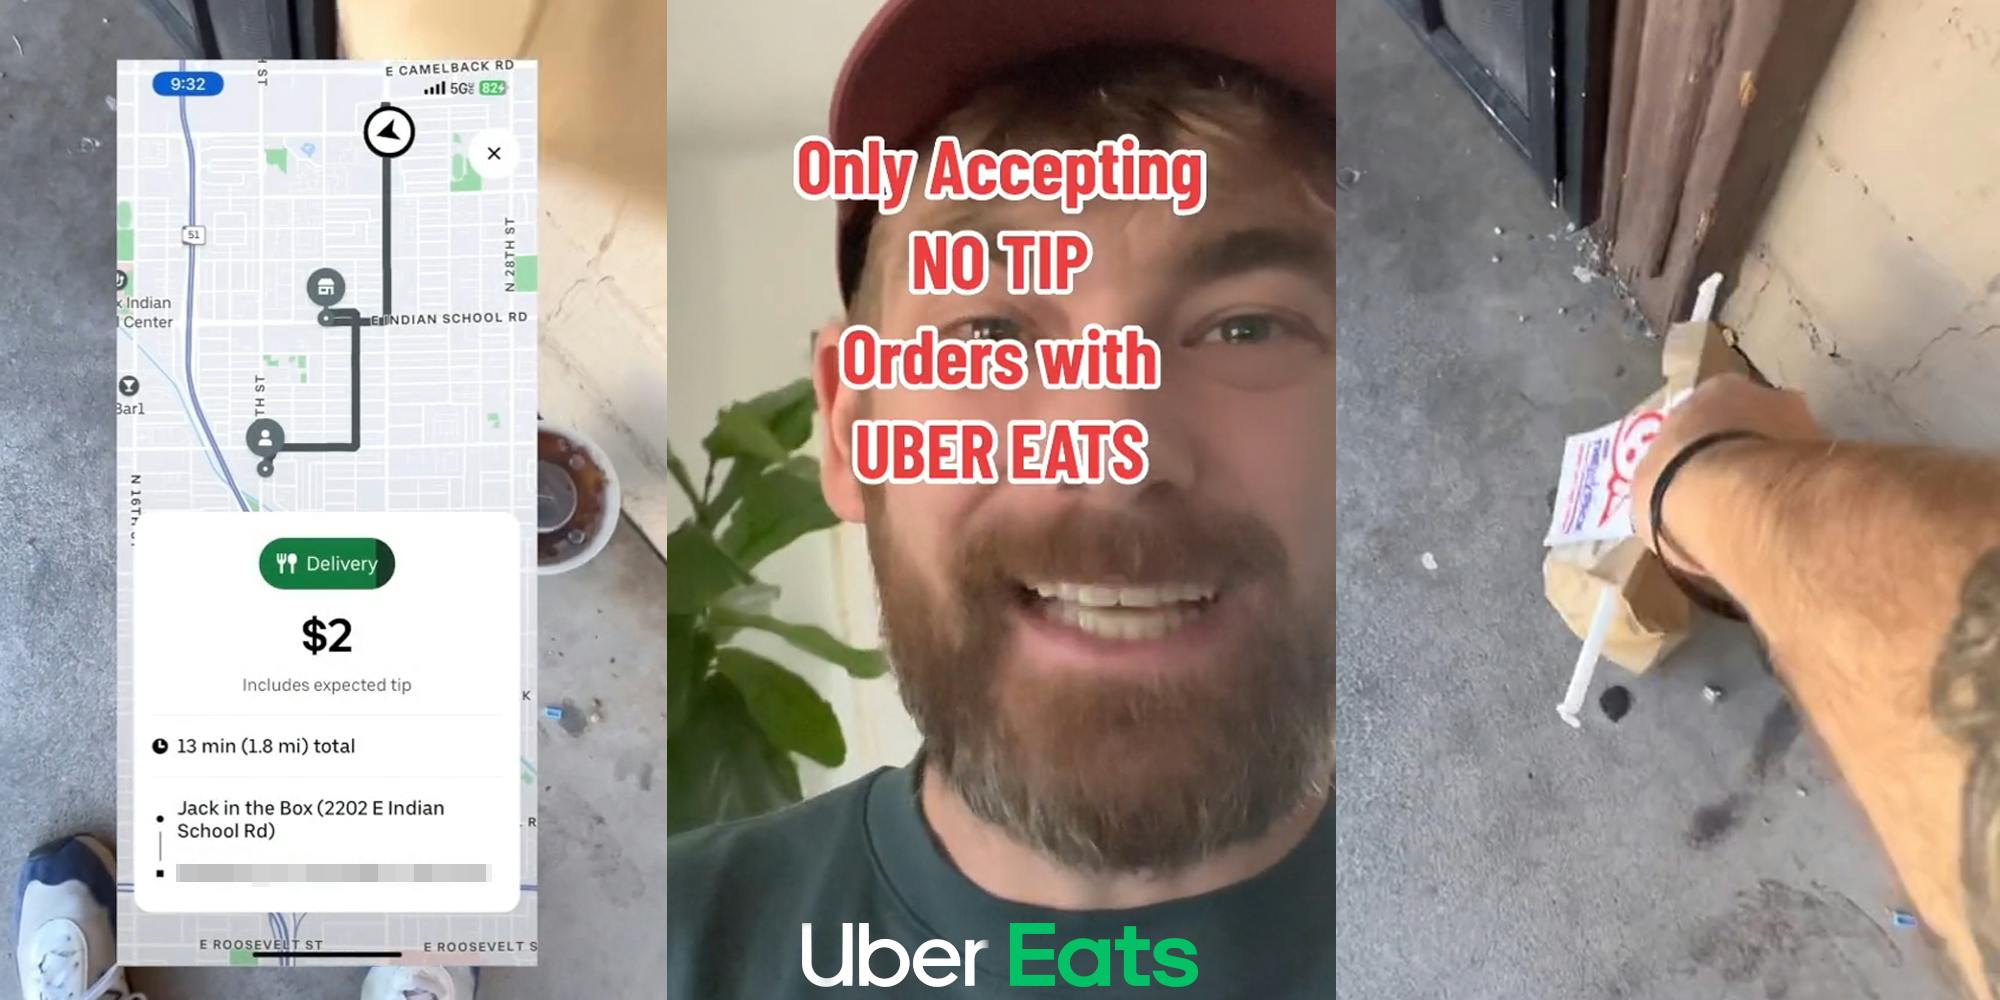 Uber Eats order on screen in front of driver delivering order at door (l) Uber Eats driver speaking with Uber Eats logo at bottom with caption "Only Accepting NO TIP Orders with UBER EATS" (c) Uber Eats driver placing order at door (r)